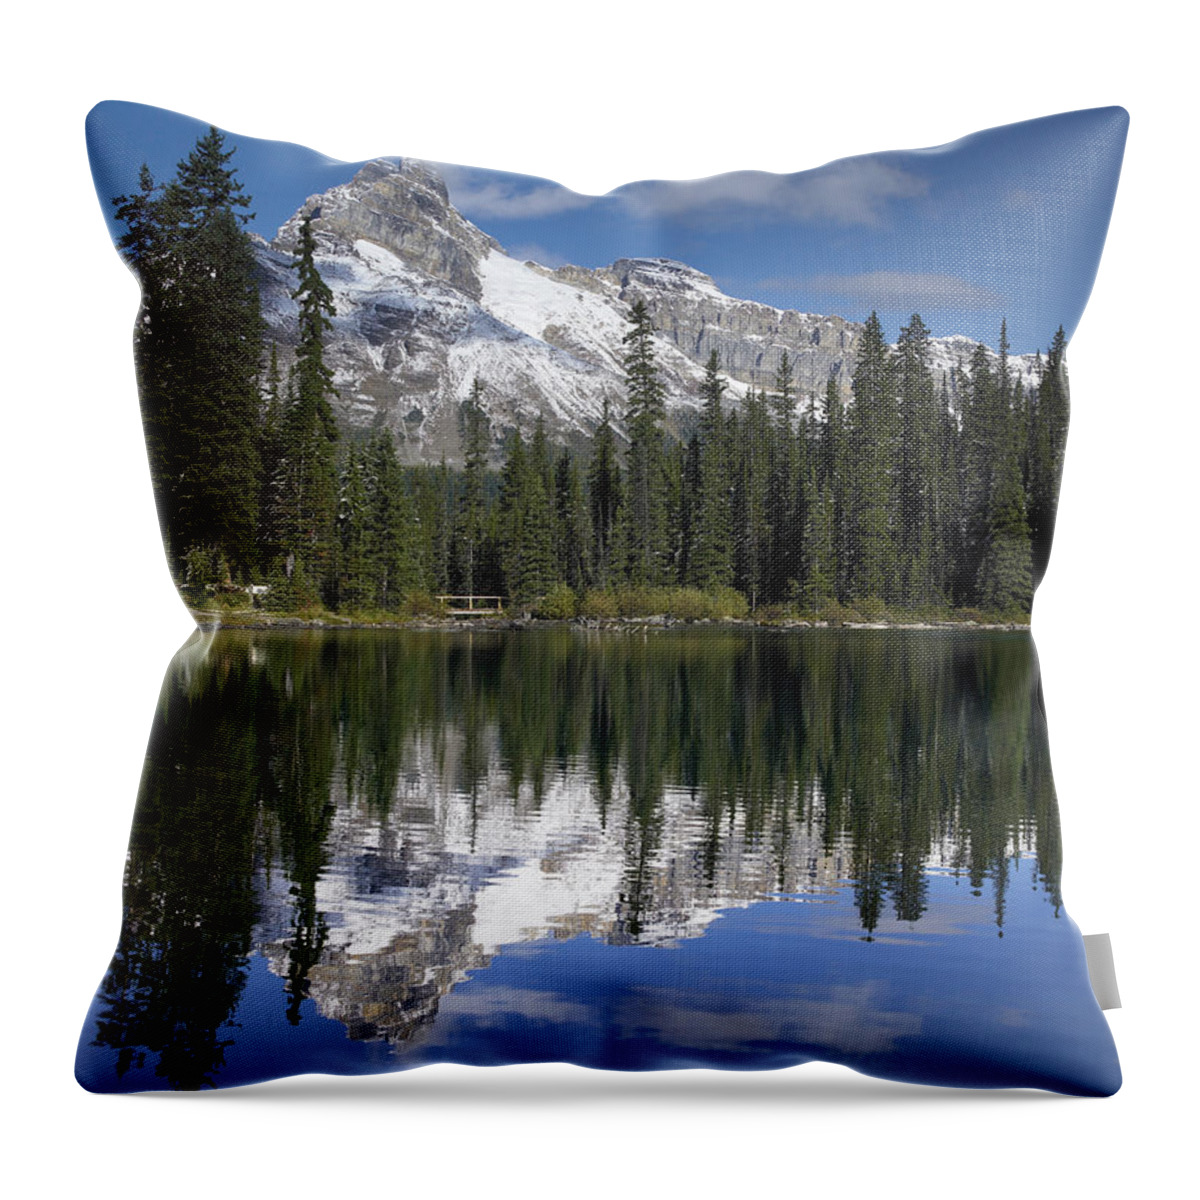 00176089 Throw Pillow featuring the photograph Wiwaxy Peaks And Cathedral Mountain #1 by Tim Fitzharris